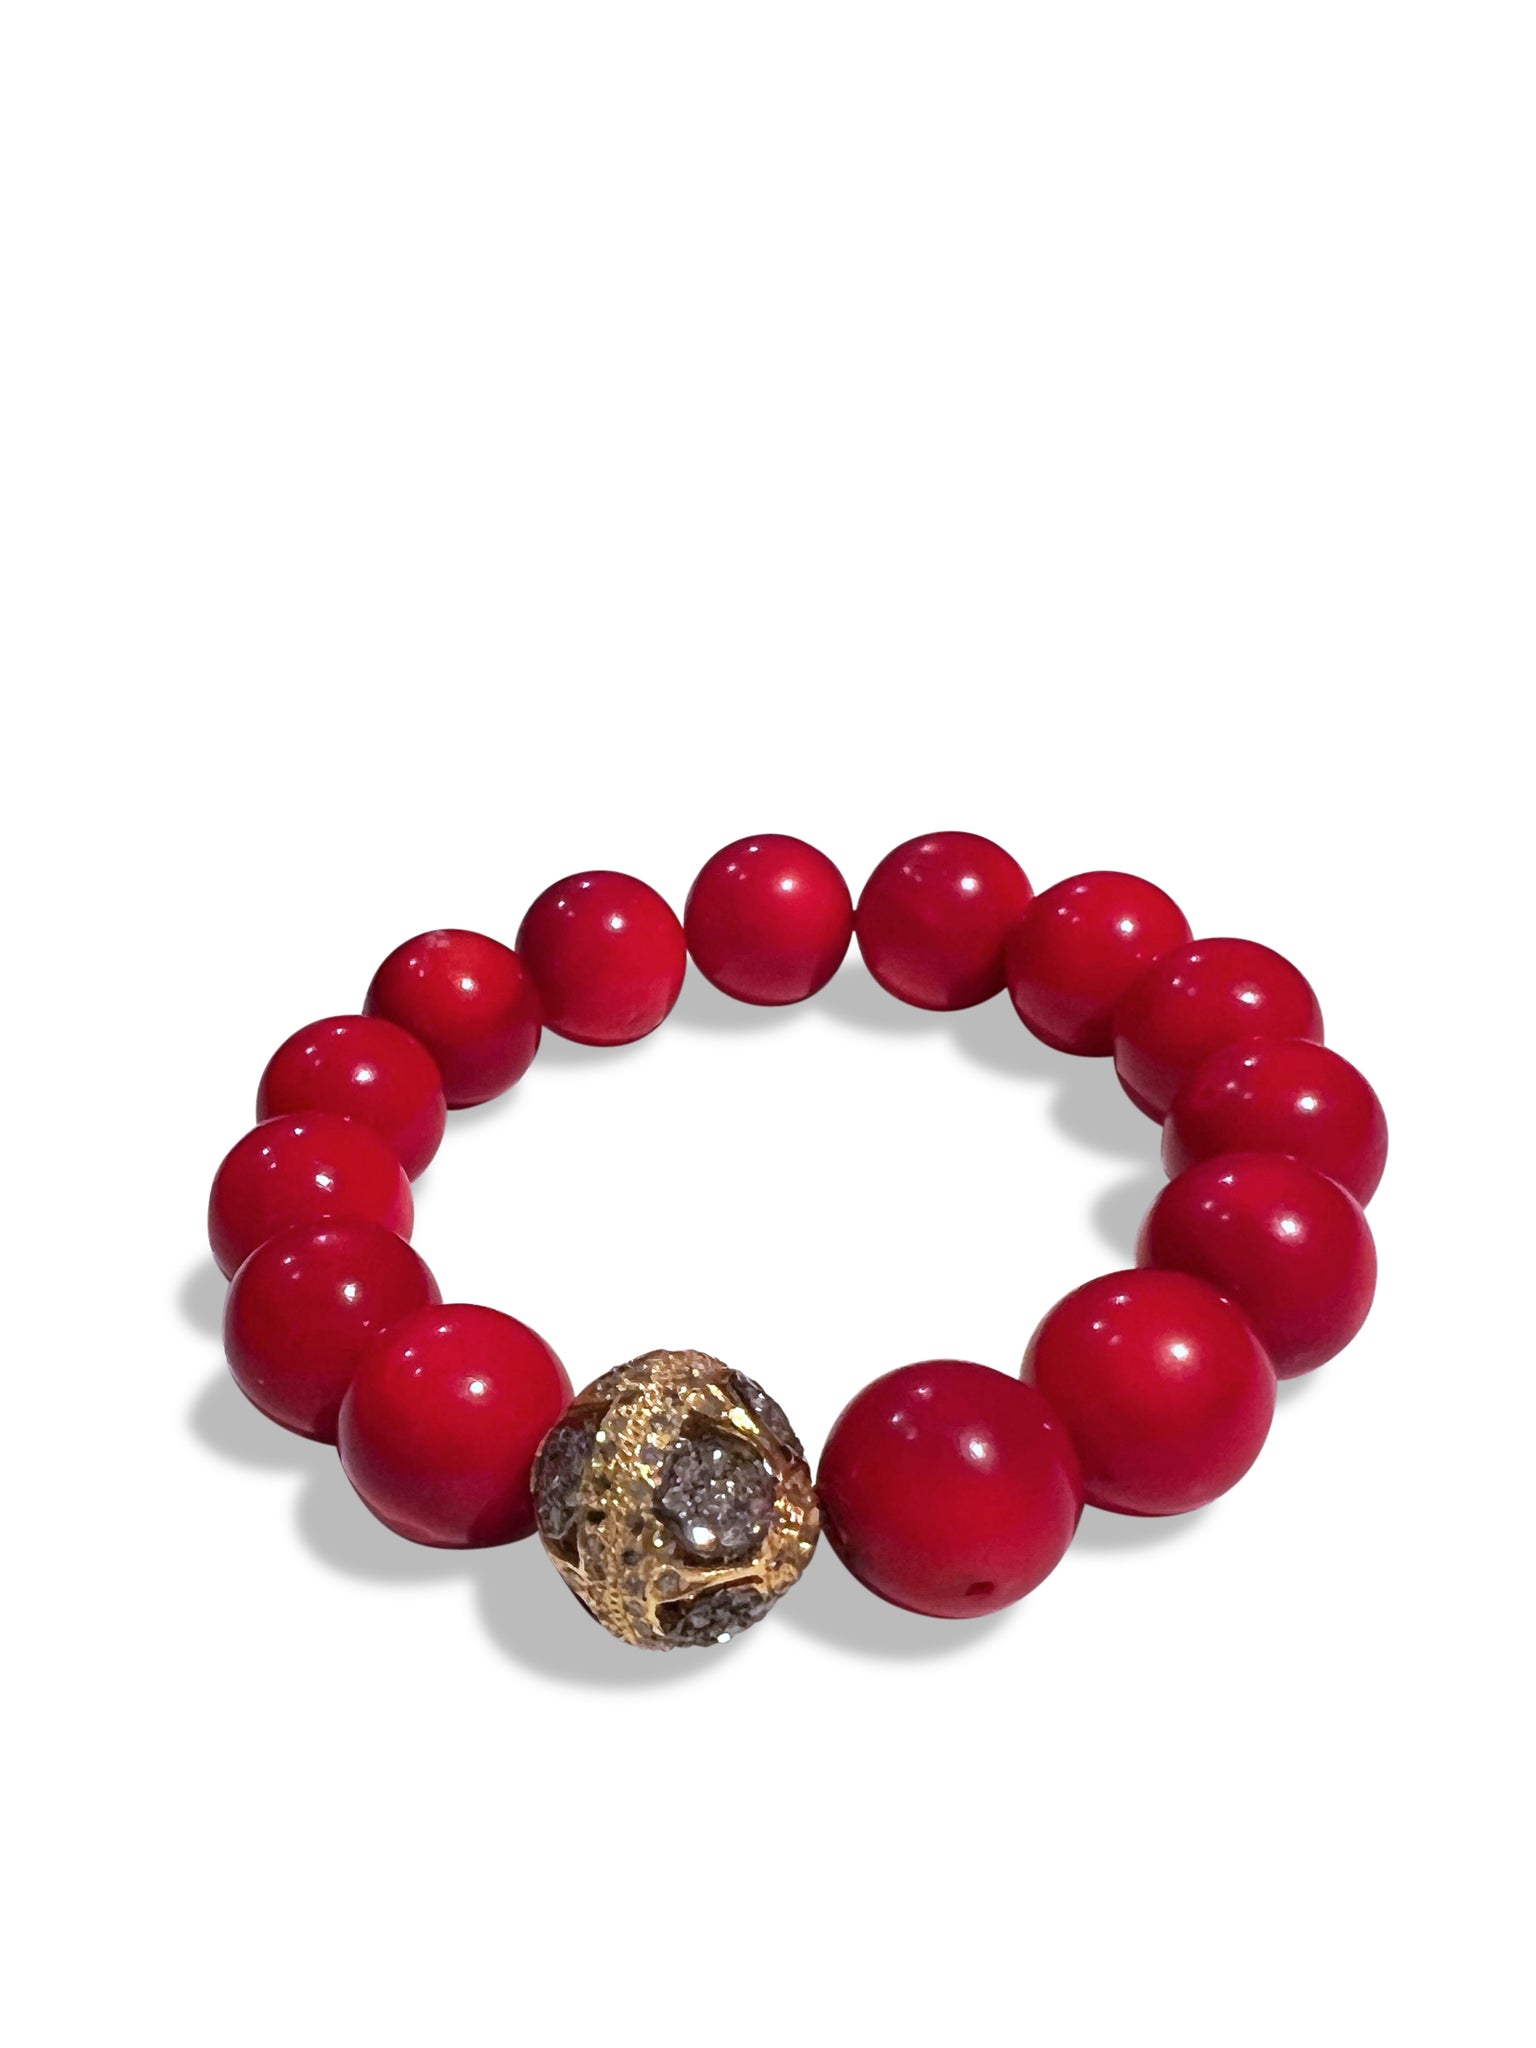 Coral 12mm with Pave Diamond Mixed Metal Bead